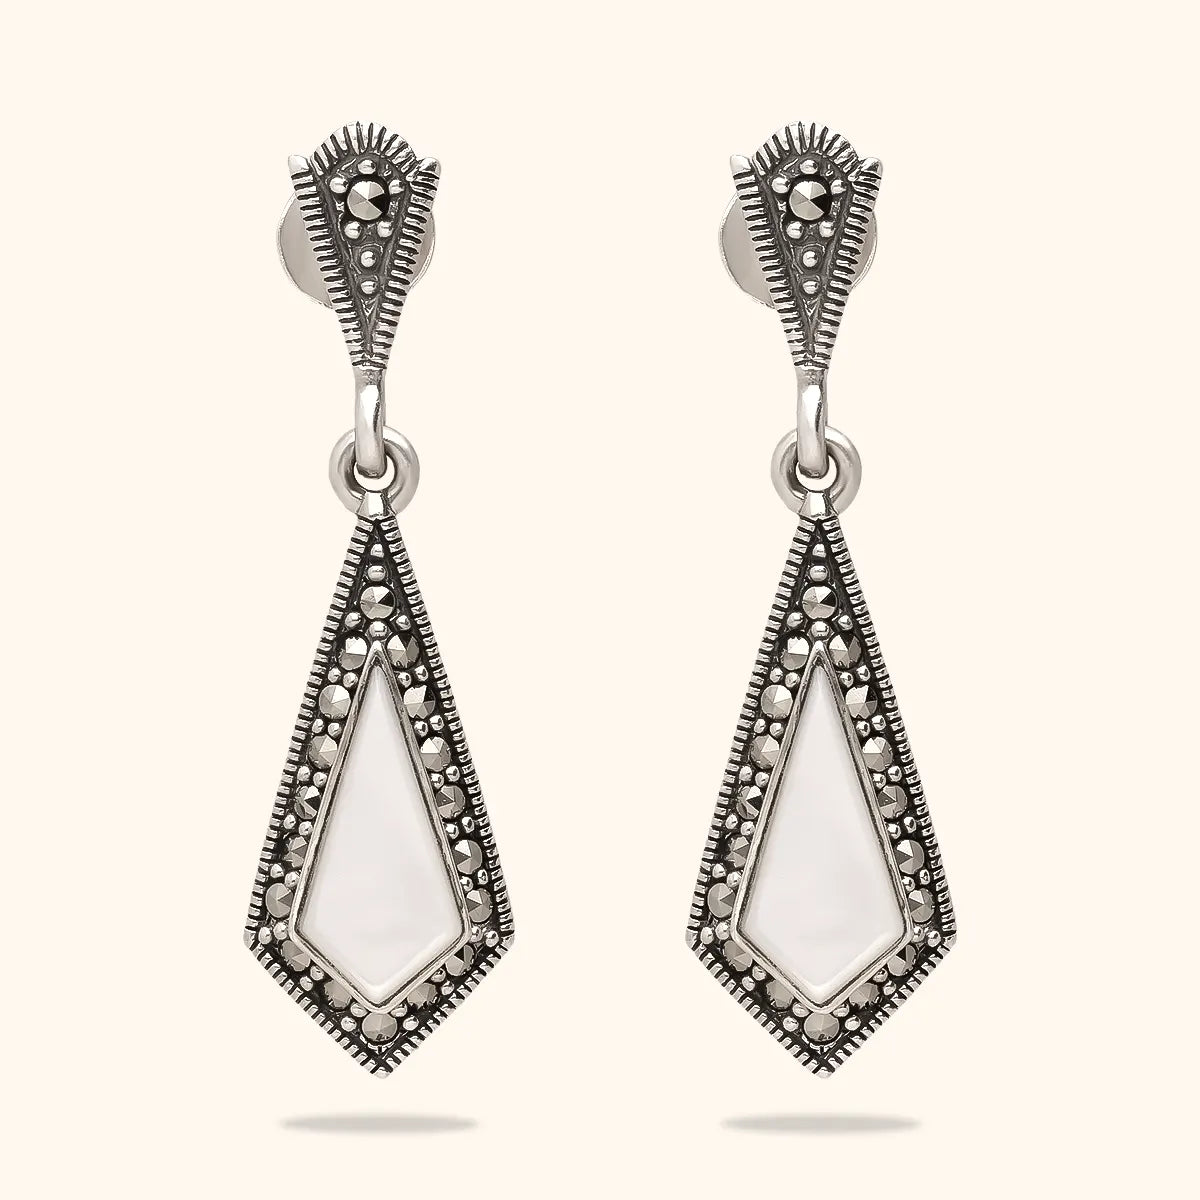 Antique Silver Earring